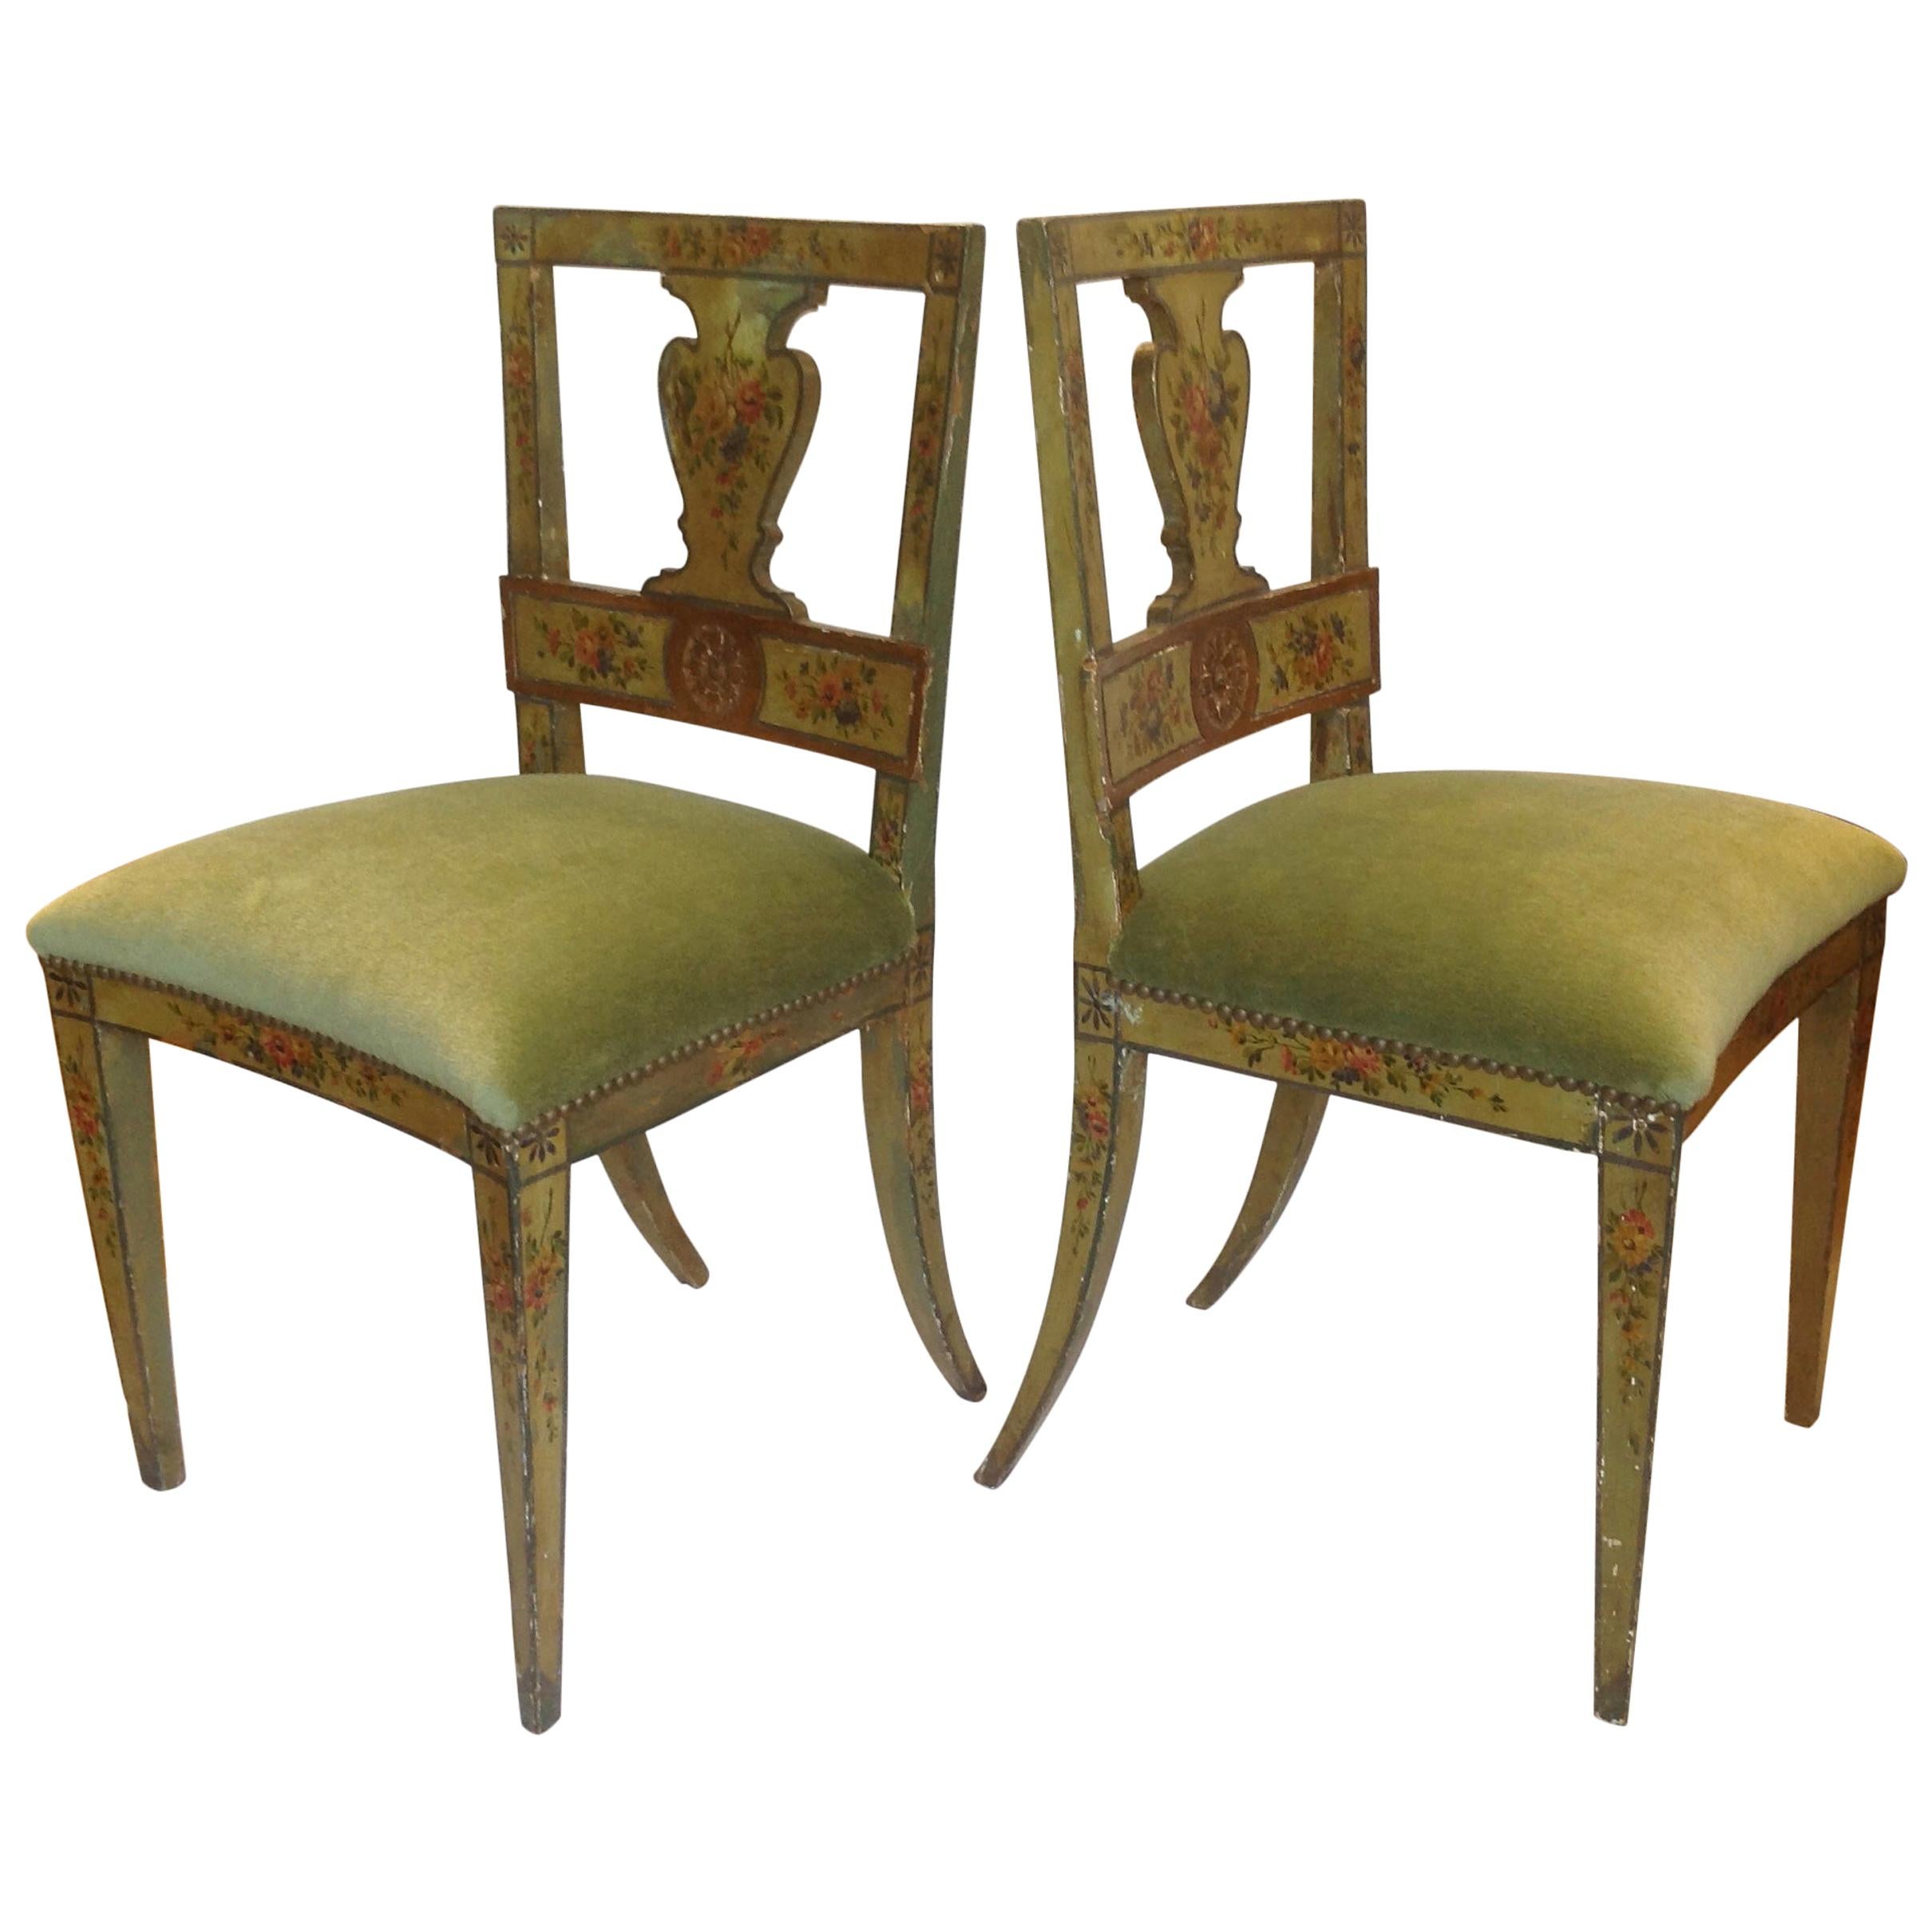 Pair of 19th Century Venetian Side Chairs